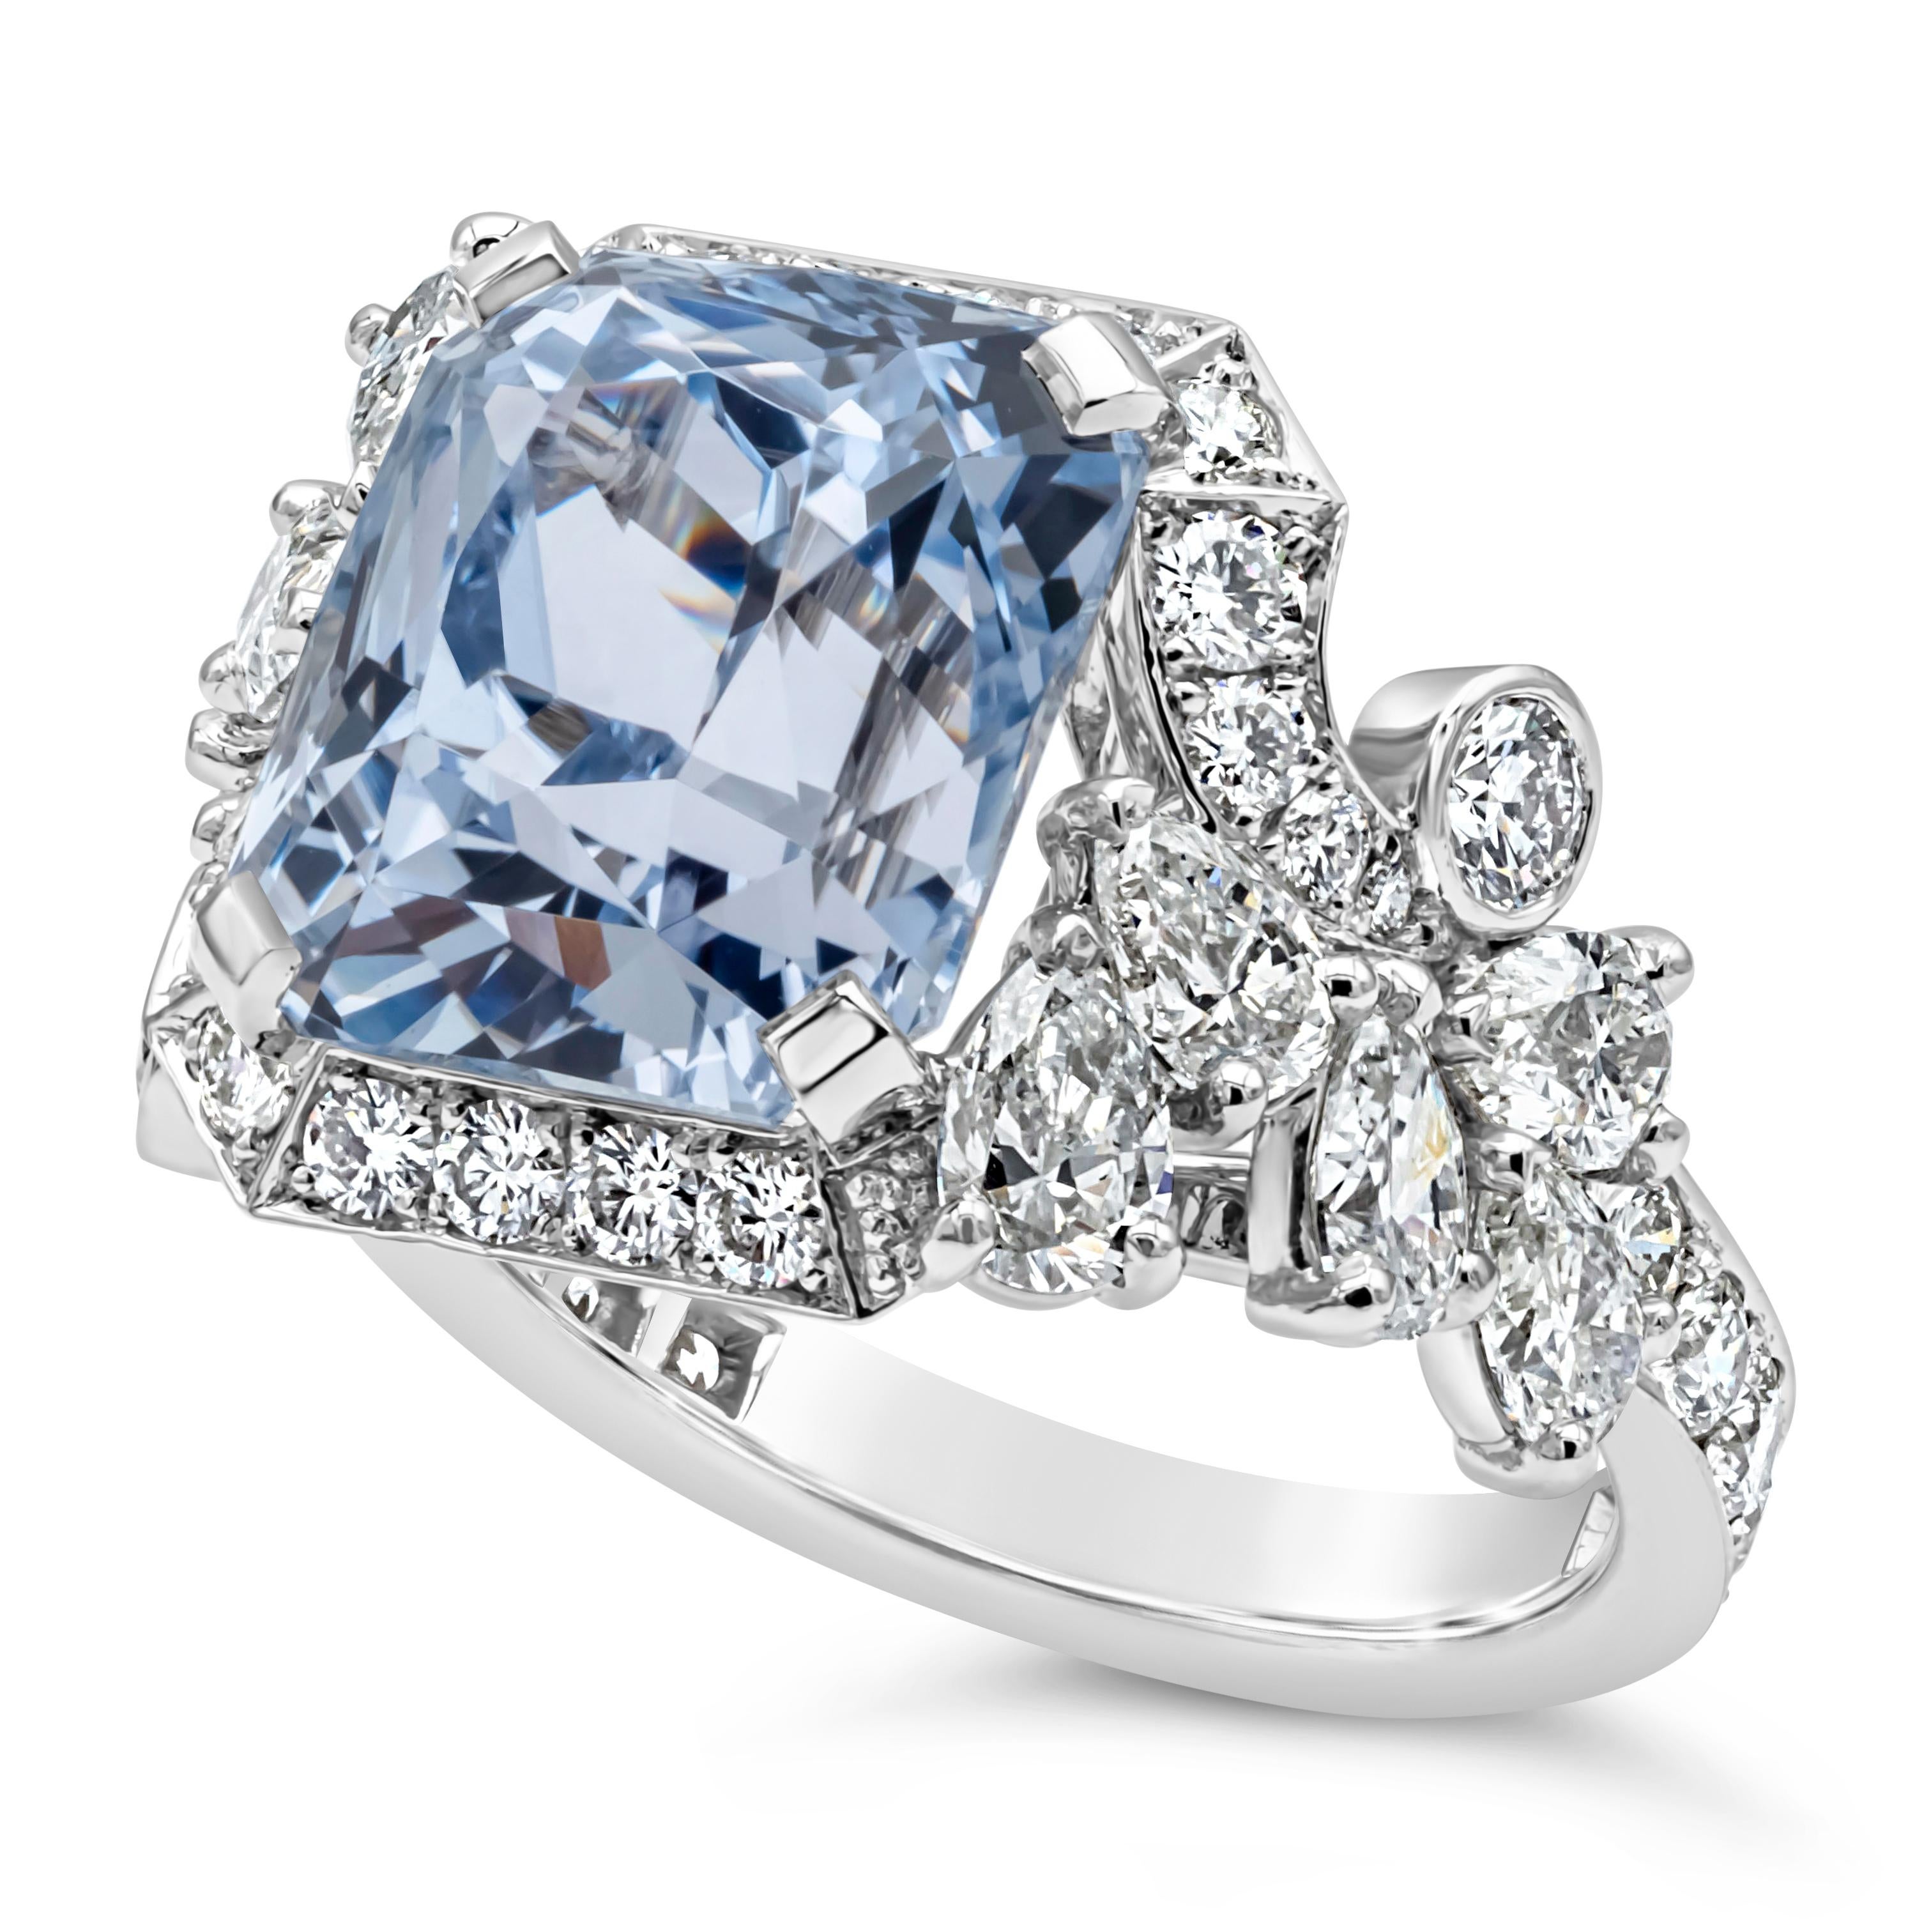 This beautiful and luxurious fashion ring showcases 10.96 carat radiant cut certified by GIA as light blue sapphire no indications of heat treatment. Accented by brilliant round and pear shape diamonds on each side weighing 2.93 carats total, E-F